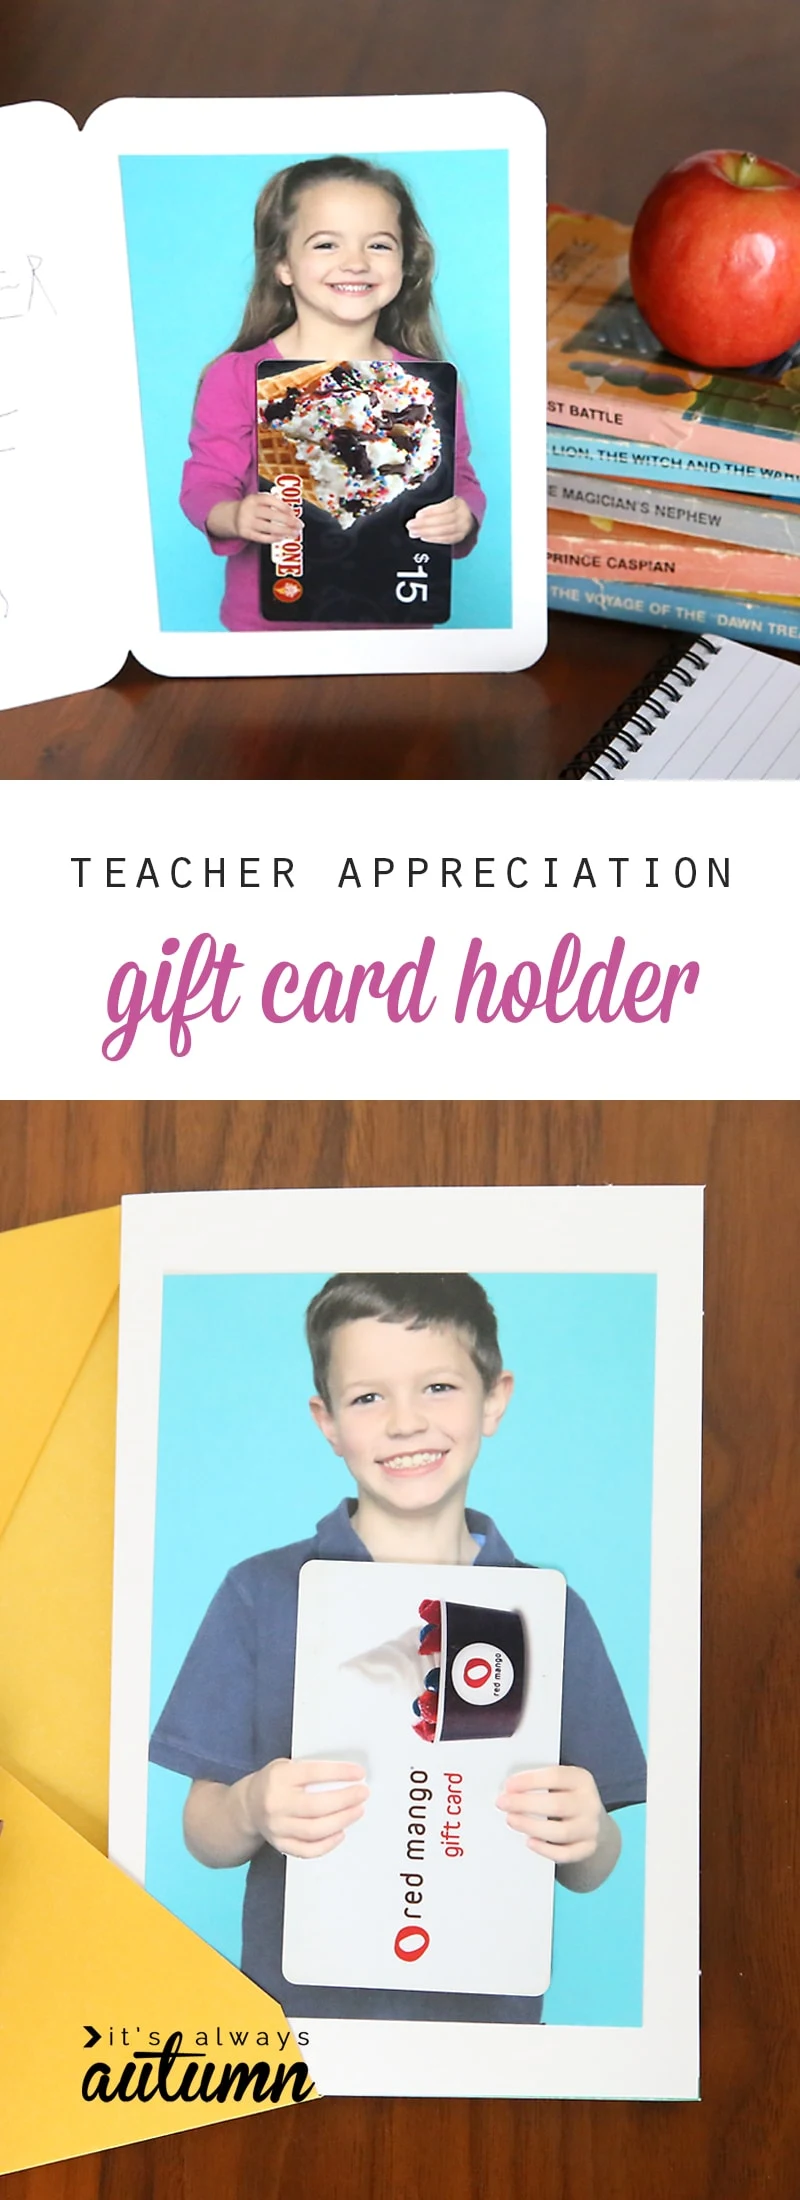 DIY photo gift card holder. Gift idea for Teacher Appreciation Week. This site has some great ideas for DIY teacher gifts.